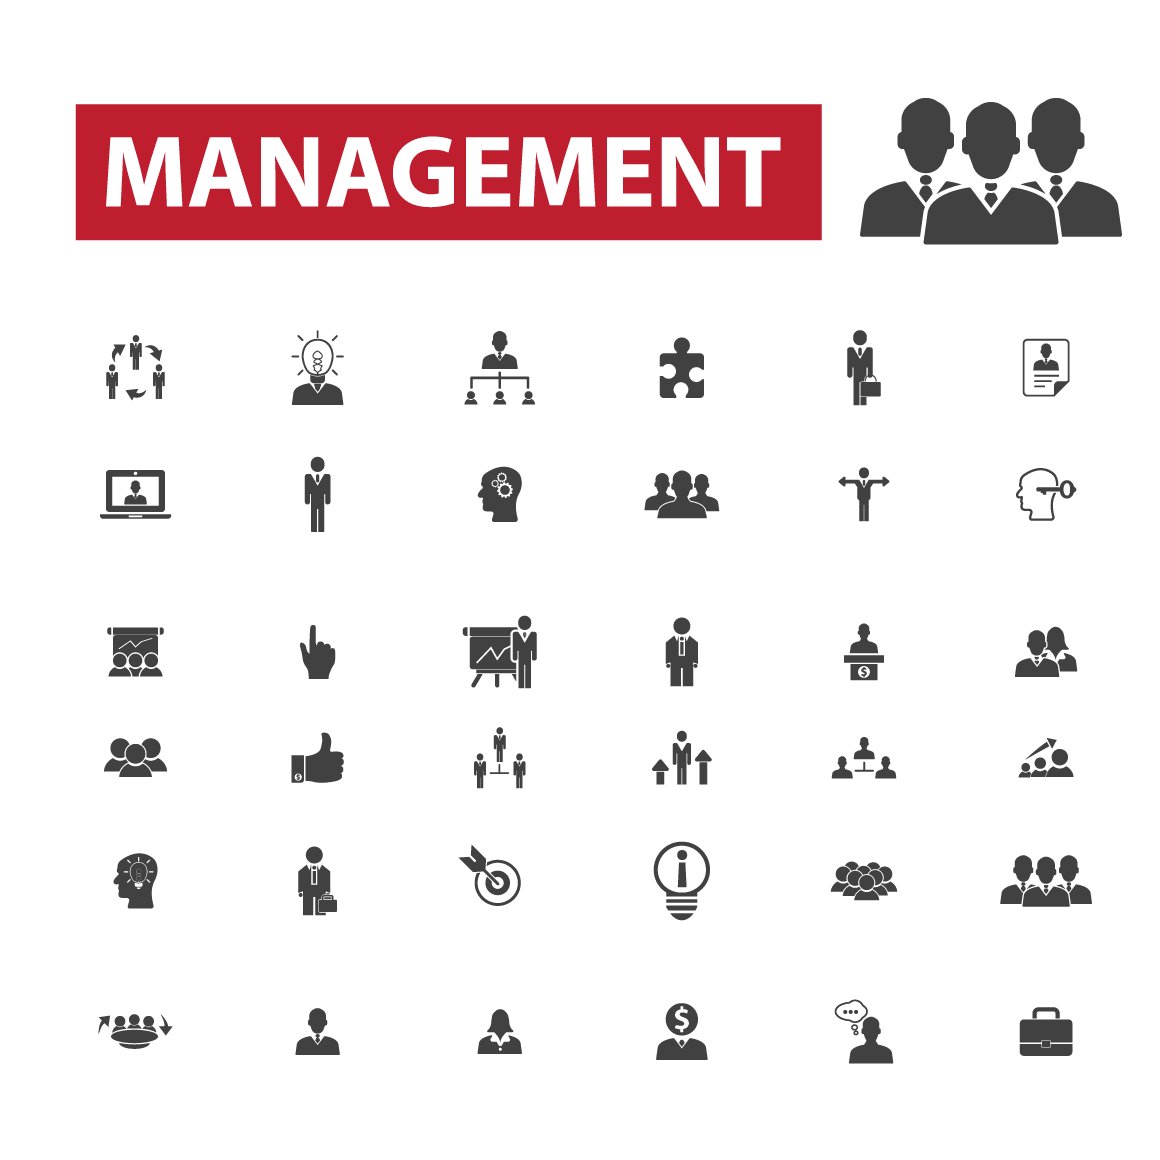 36 management icons preview image.